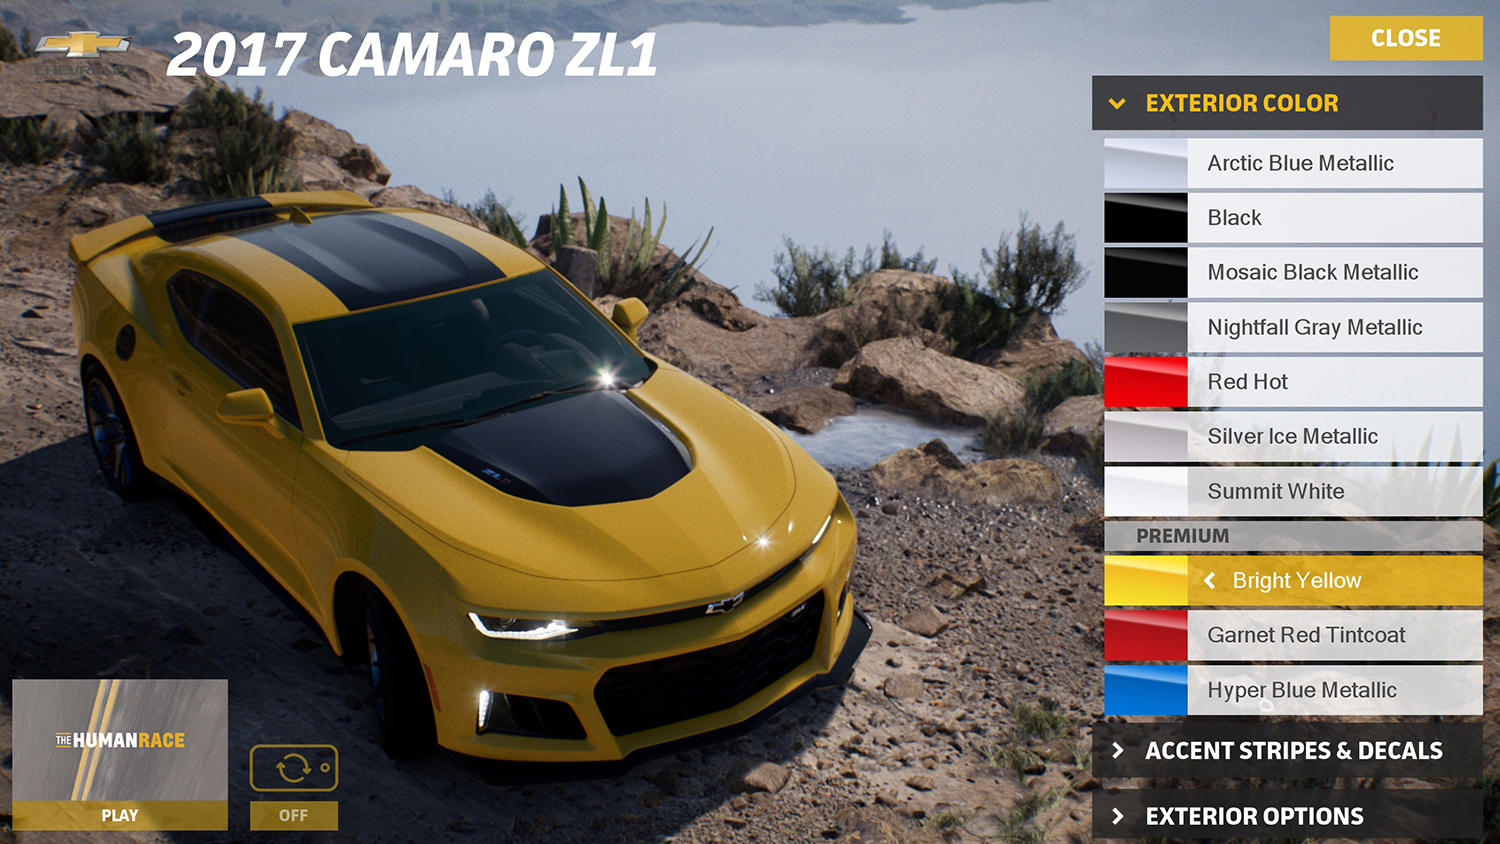 Epic Games' Unreal Engine 4 powers new Chevrolet car customizer.